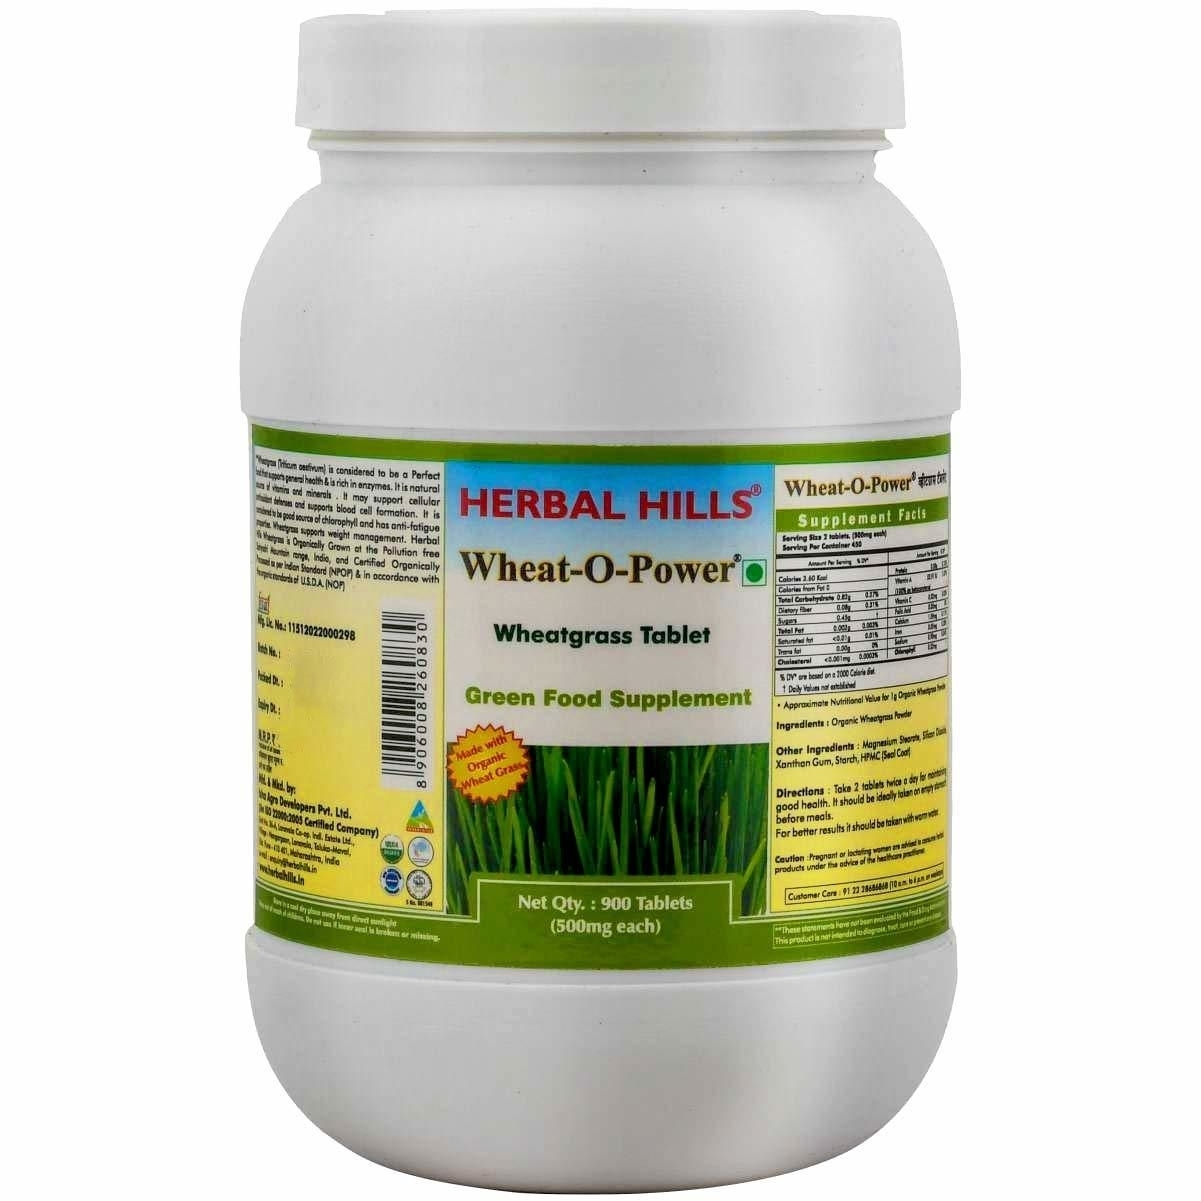 Herbal Hills Wheat-O-Power 900 Tablets